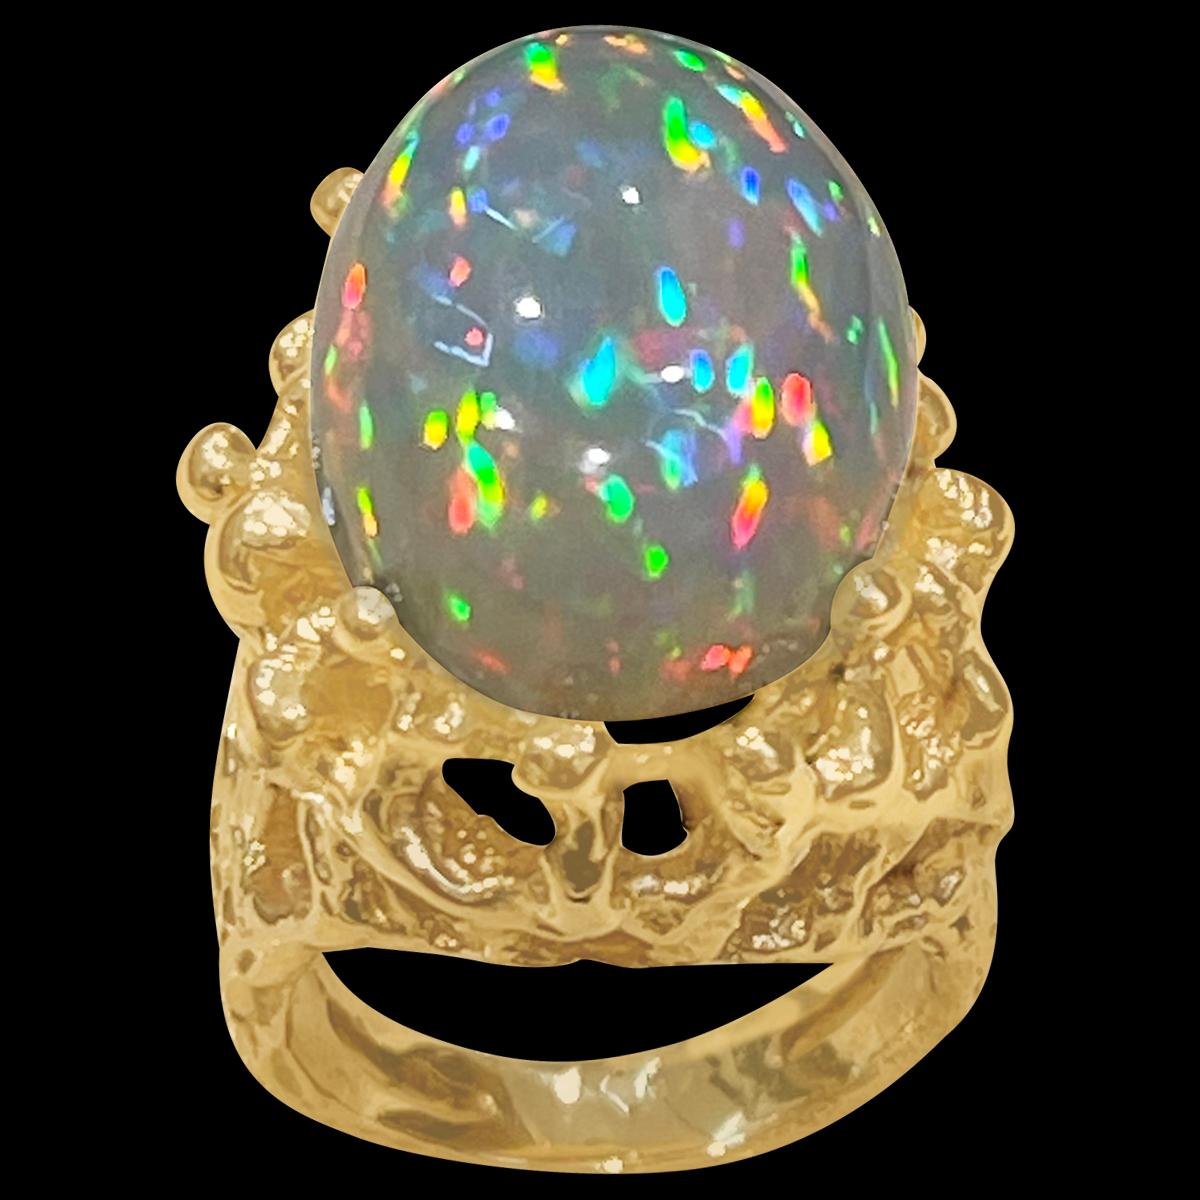 17.22  Carat Oval Shape Ethiopian Opal Cocktail Ring 14 Karat Yellow Gold size 6
Oval  Natural Opal  A classic, Cocktail ring , Very solid make d
14 Karat Yellow Gold Estate
Size of the opal 20 X 15 MM, 17.22 exact weight
Amazing colors in this opal